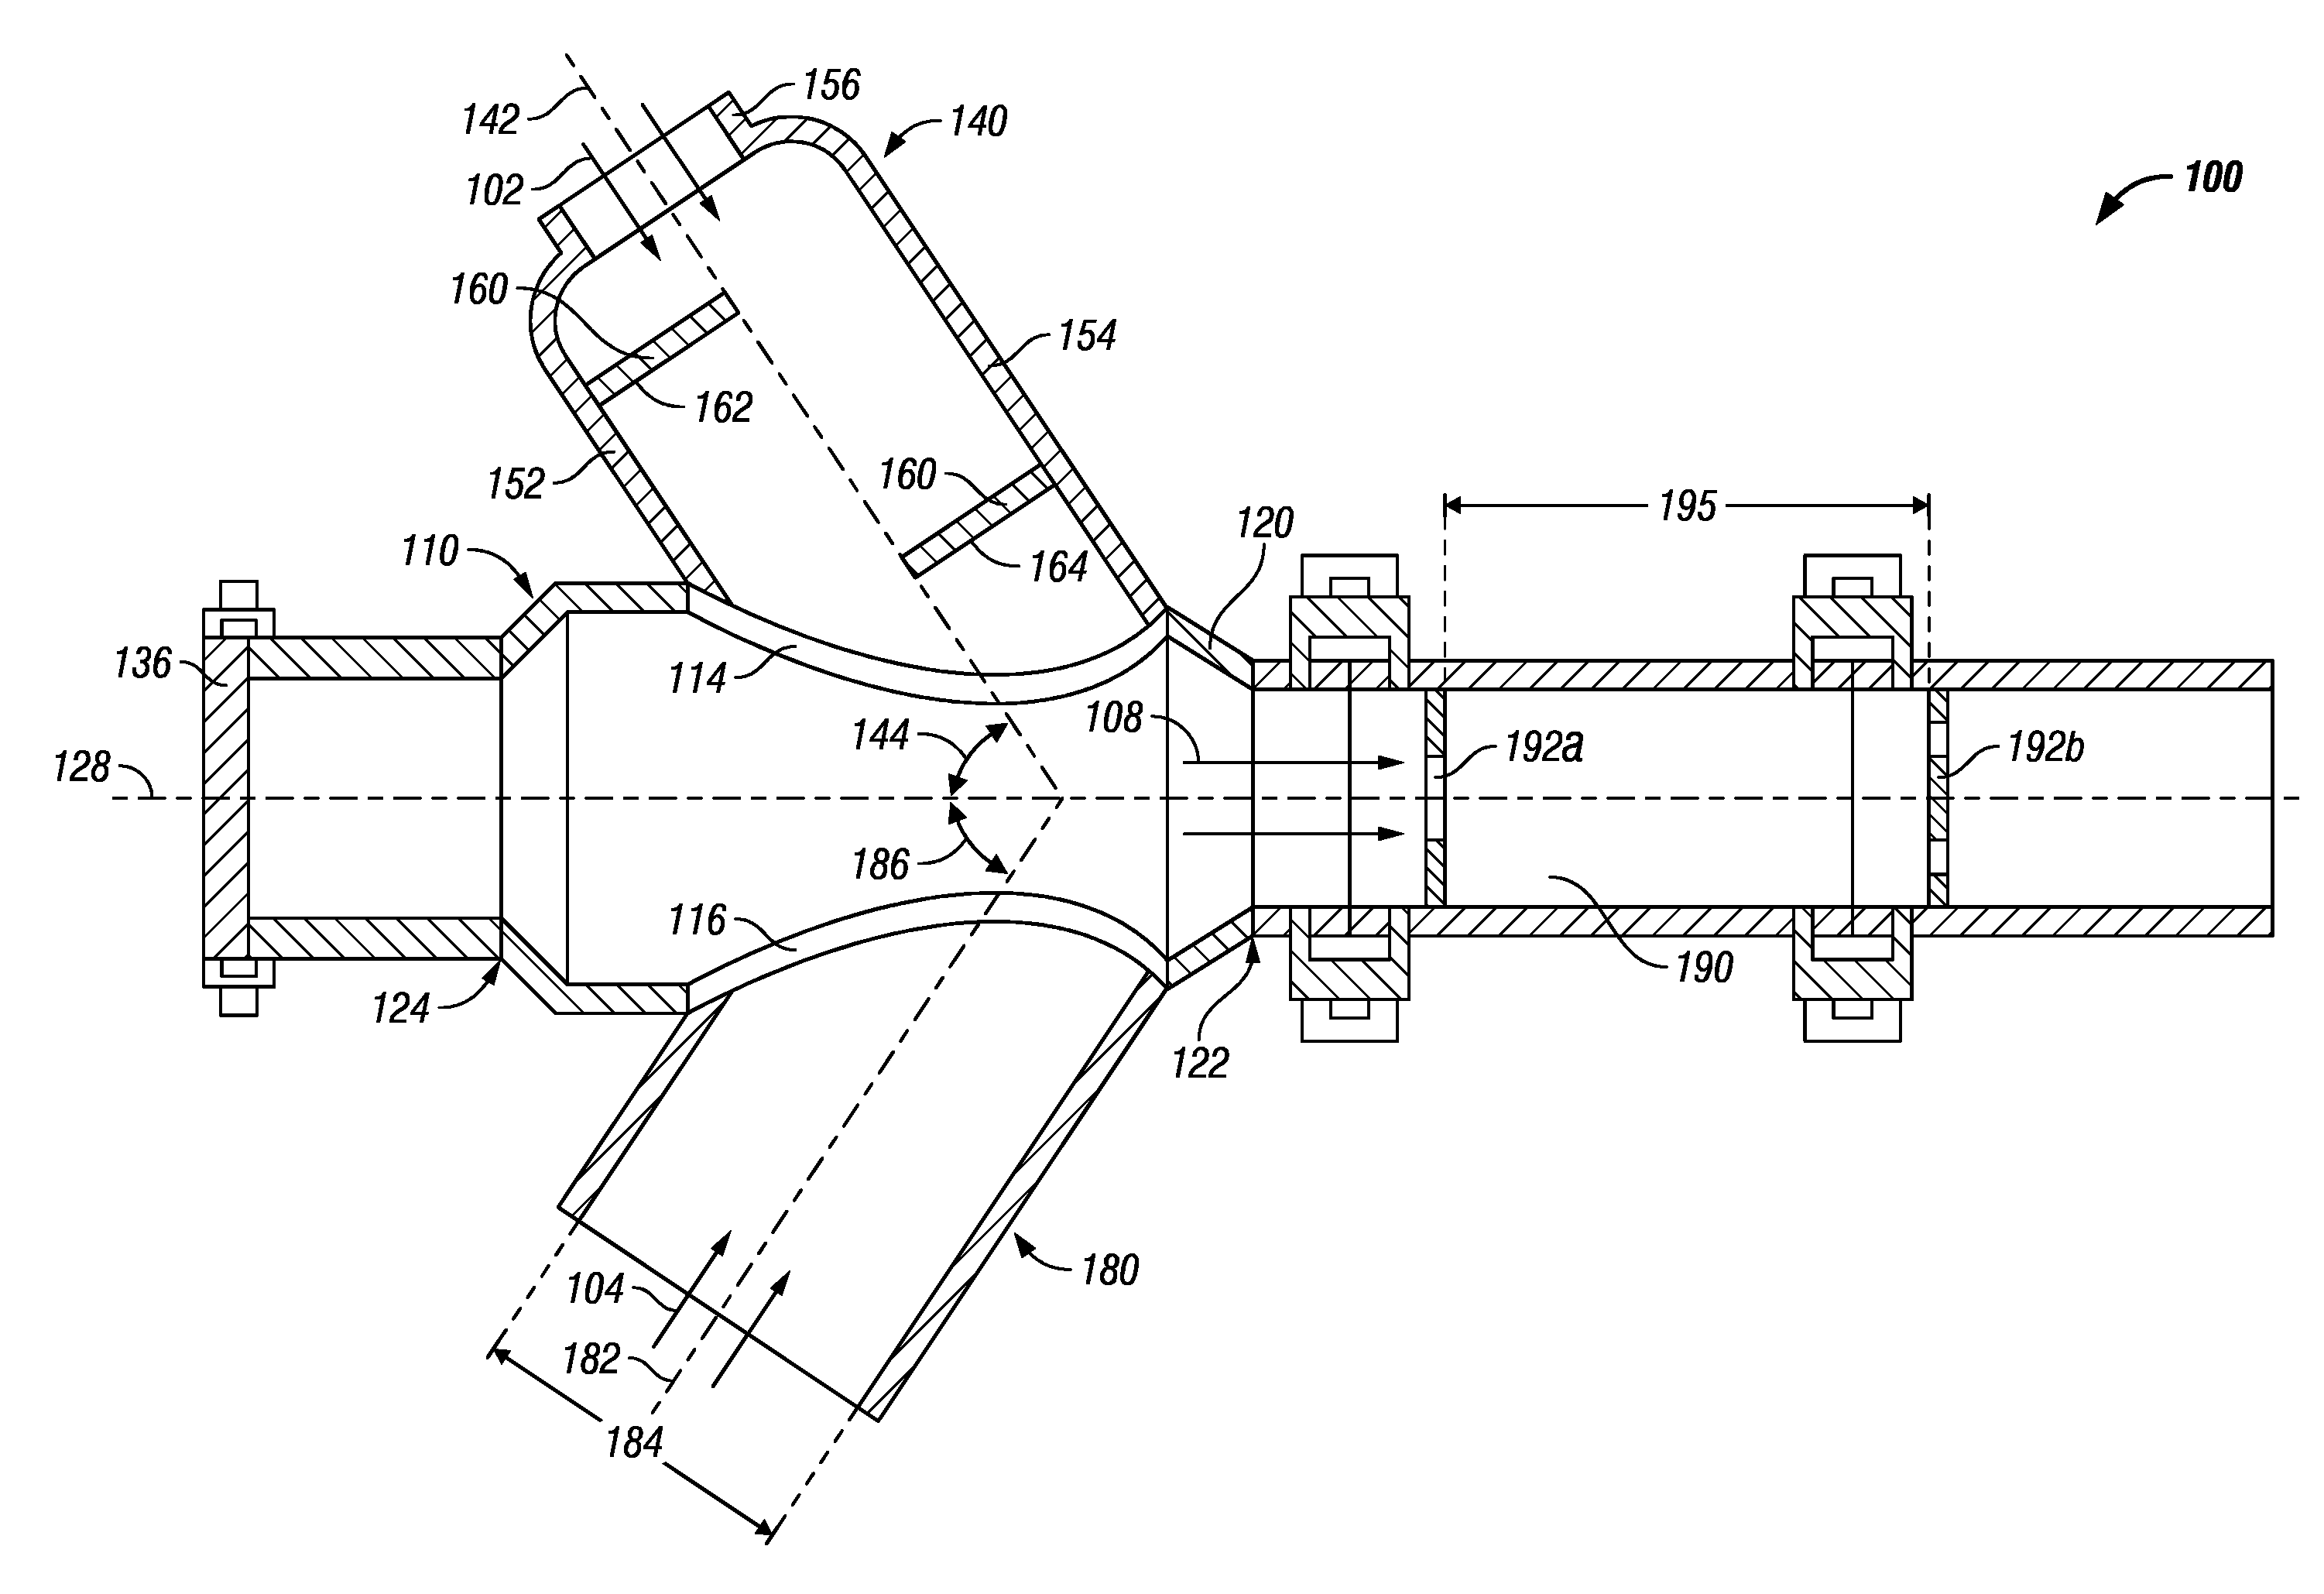 Apparatus for homogenizing two or more fluids of different densities